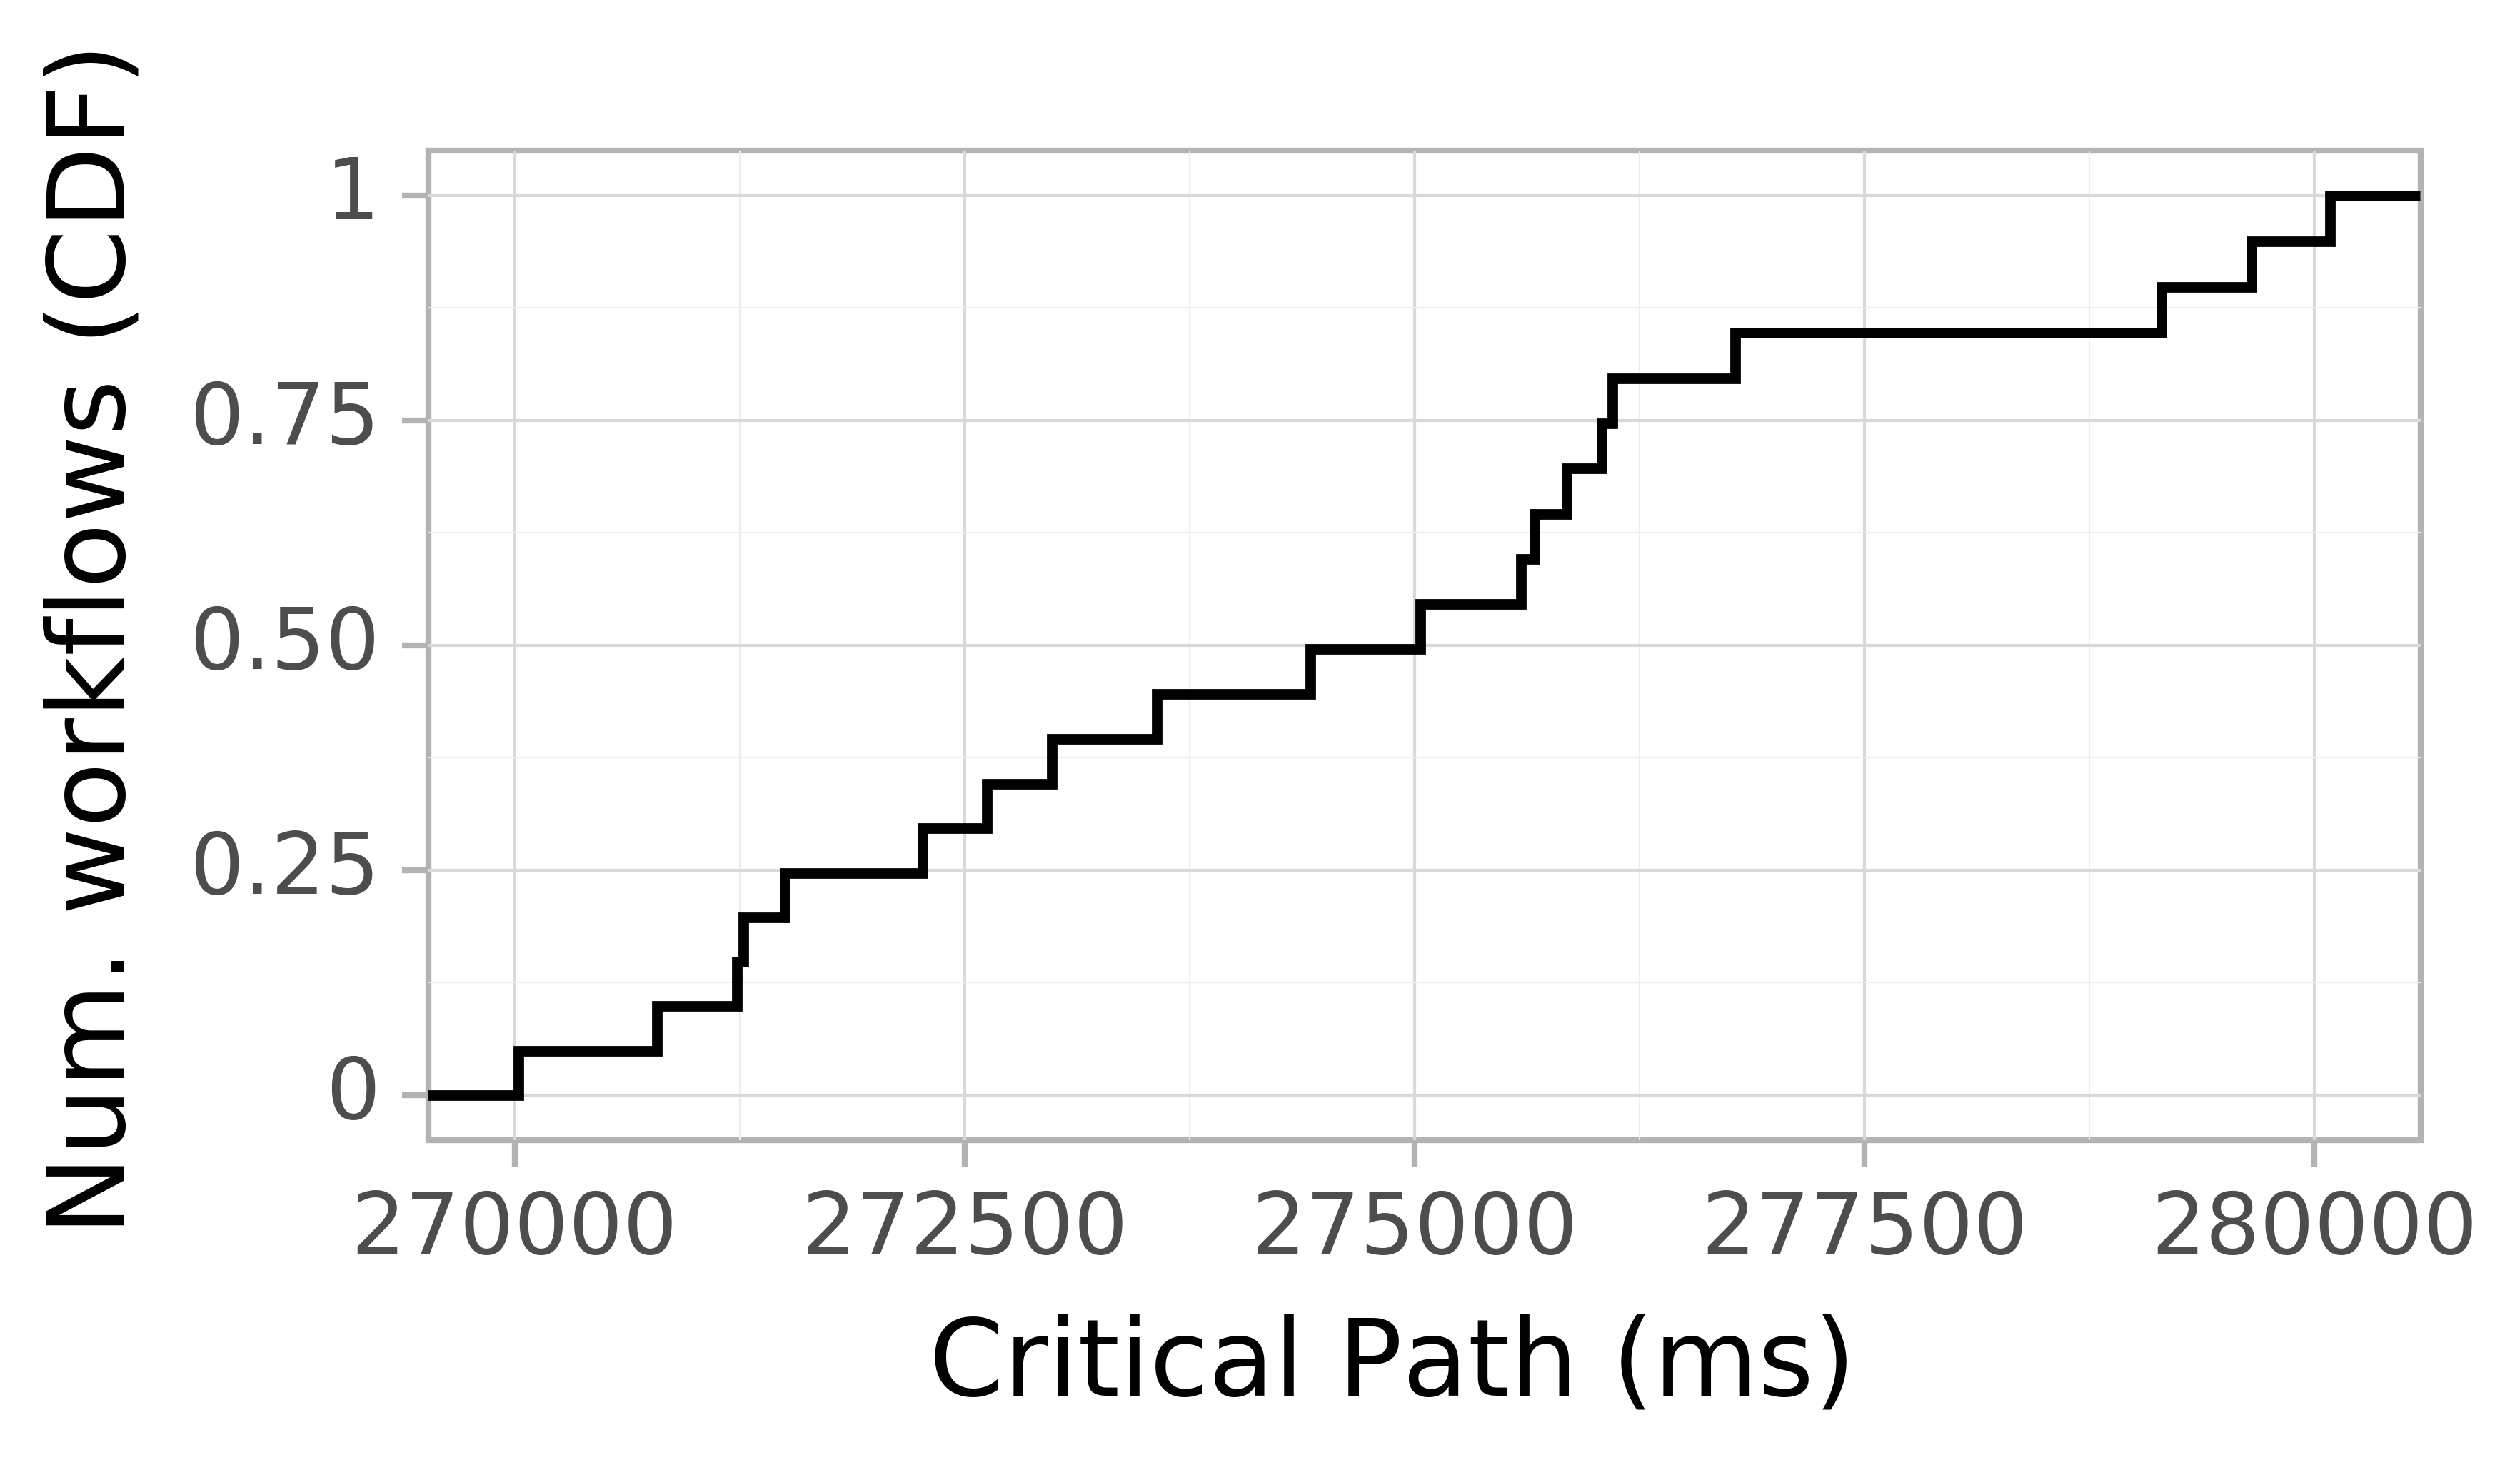 Job runtime CDF graph for the askalon-new_ee20 trace.